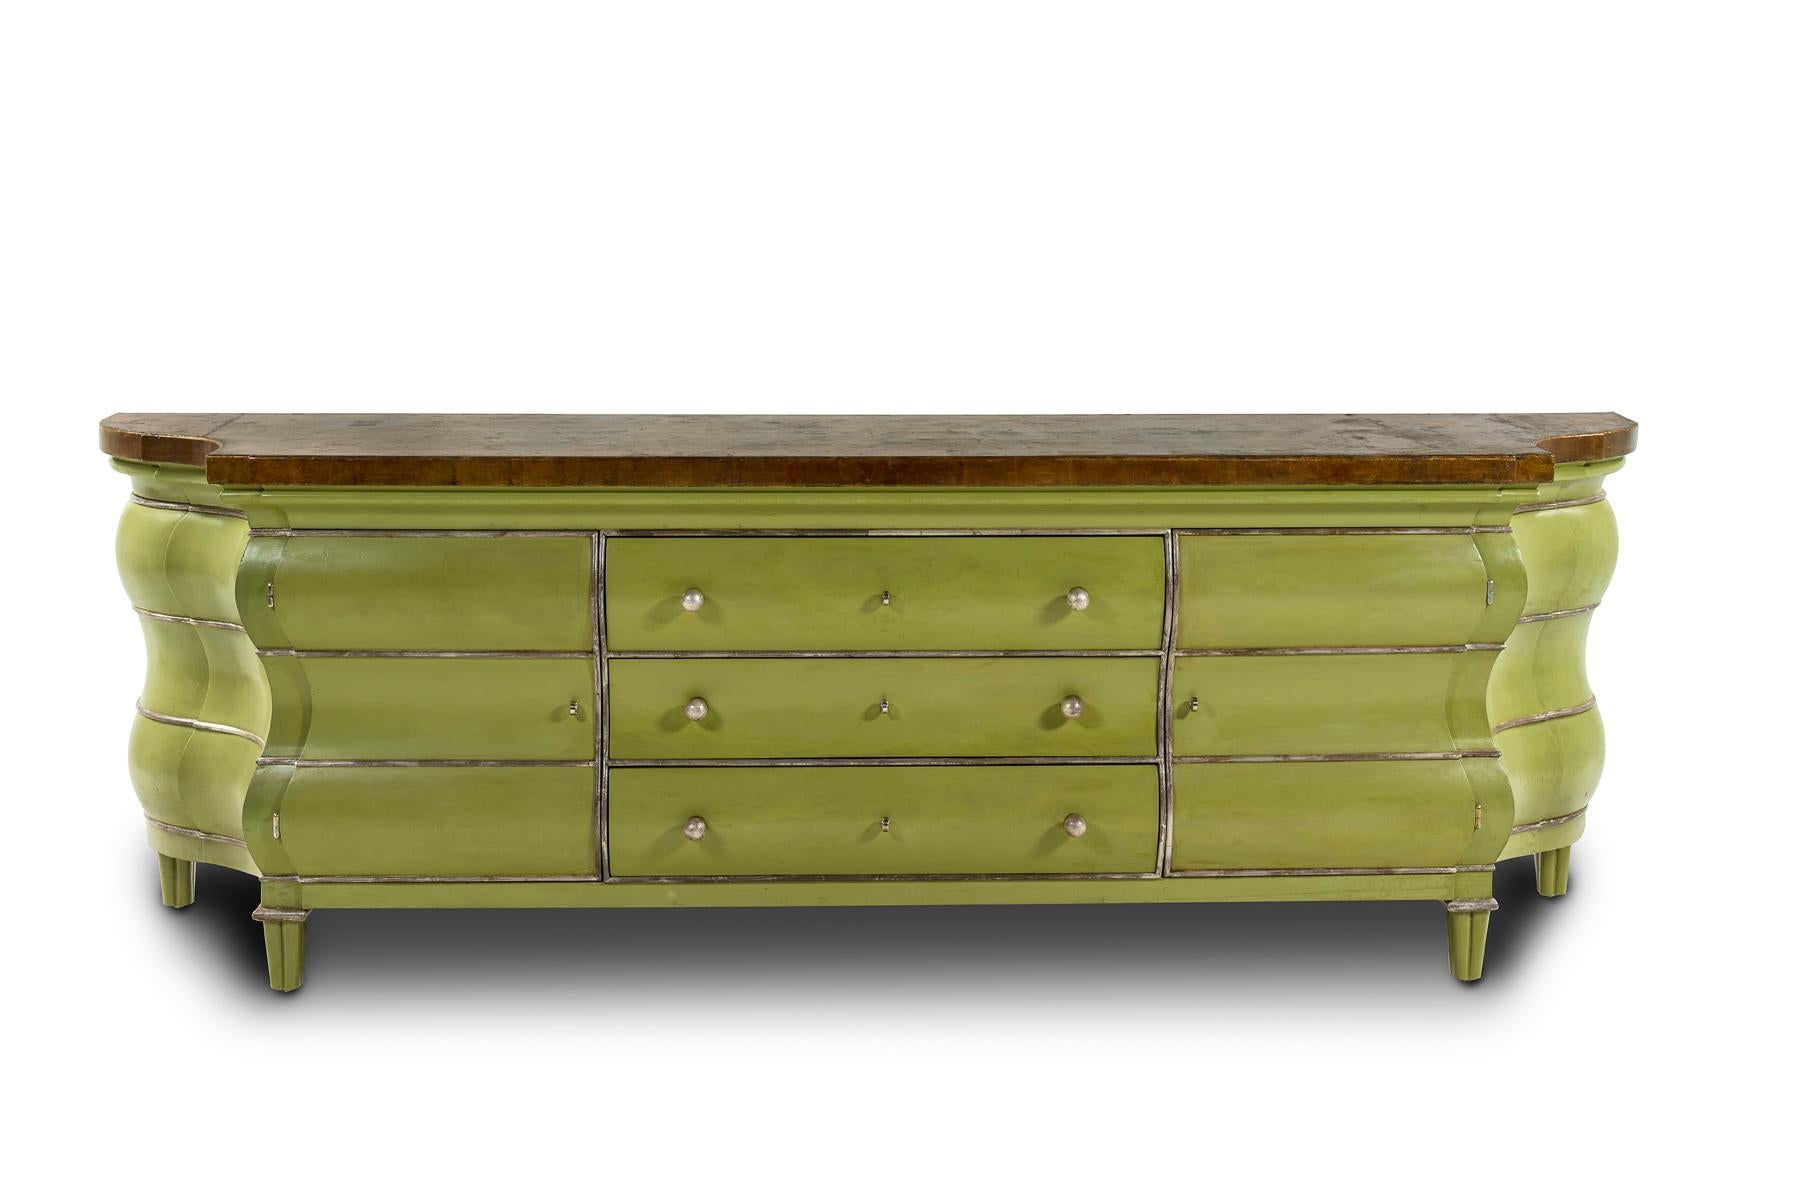 Bruno Paul 1874-1968
Germany

Neo-Baroque dresser, 1914.
Dresser with two doors and three drawers.
Solid wood carved and lacquered jade green, with silver moldings.
Golden tray with the leaf.
Variant exhibited at the Deutscher Werkbund in